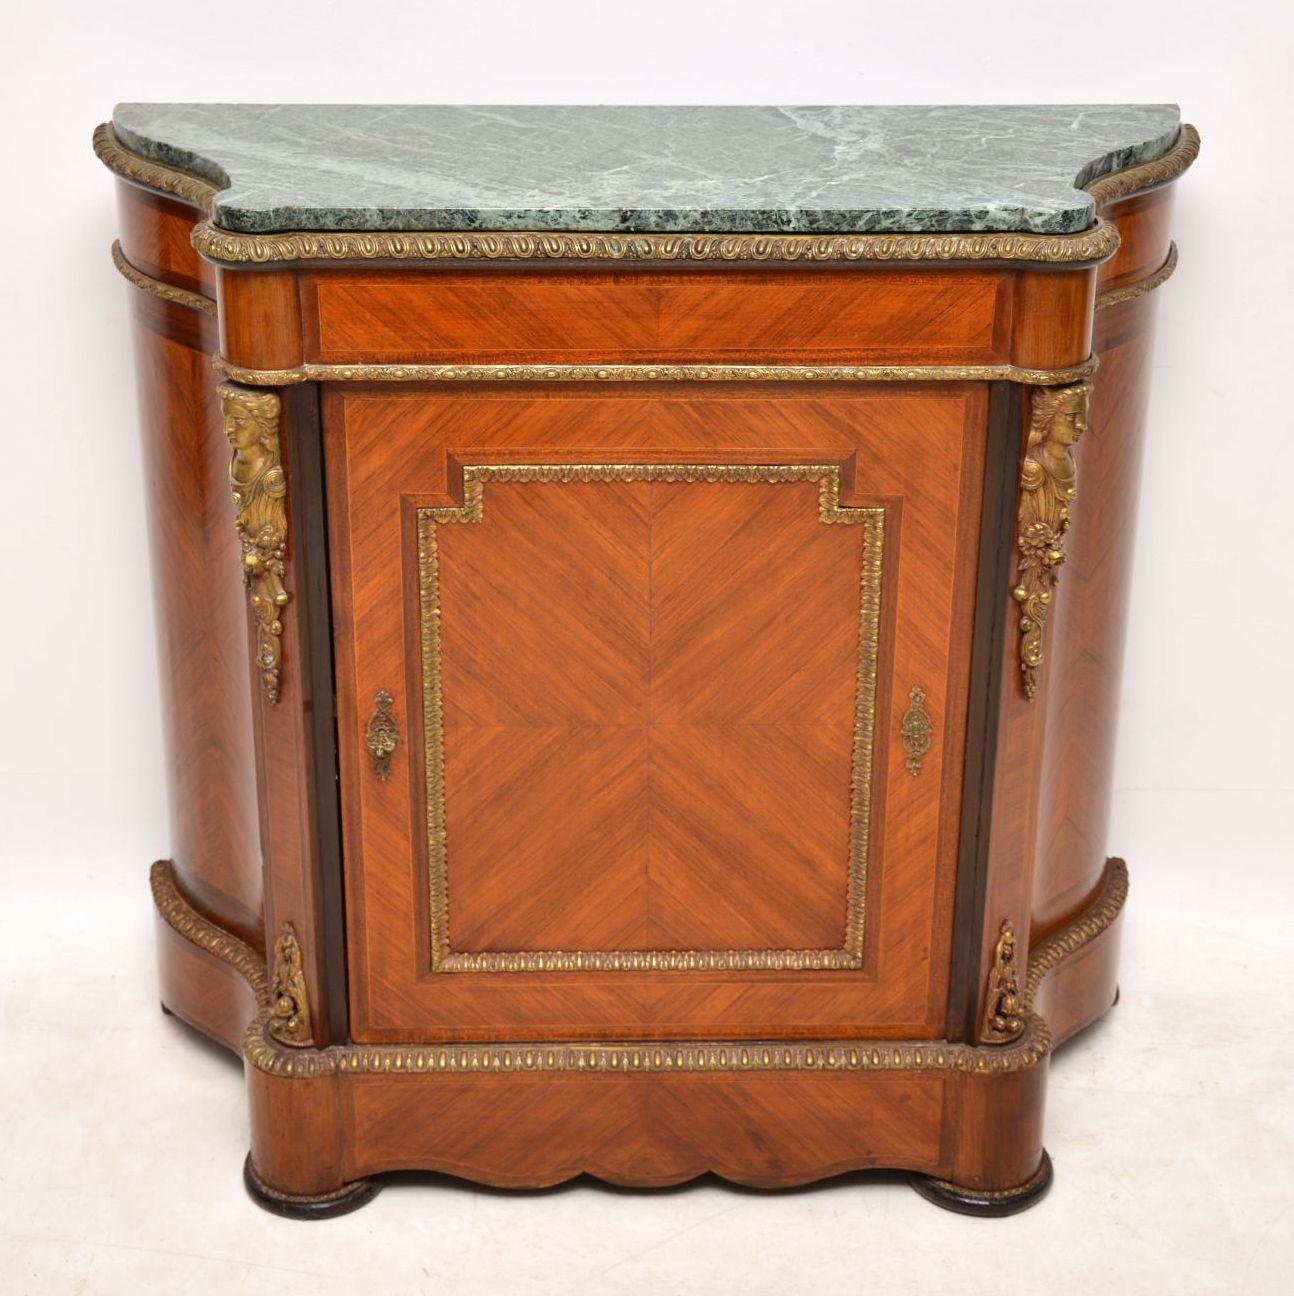 Antique French marble top cabinet in kingwood with some very decorative gilt bronze mounts. It has one central panelled door and serpentine shaped sides. The marble top is original & in good condition too. There’s one shelf inside, plus a lock & key